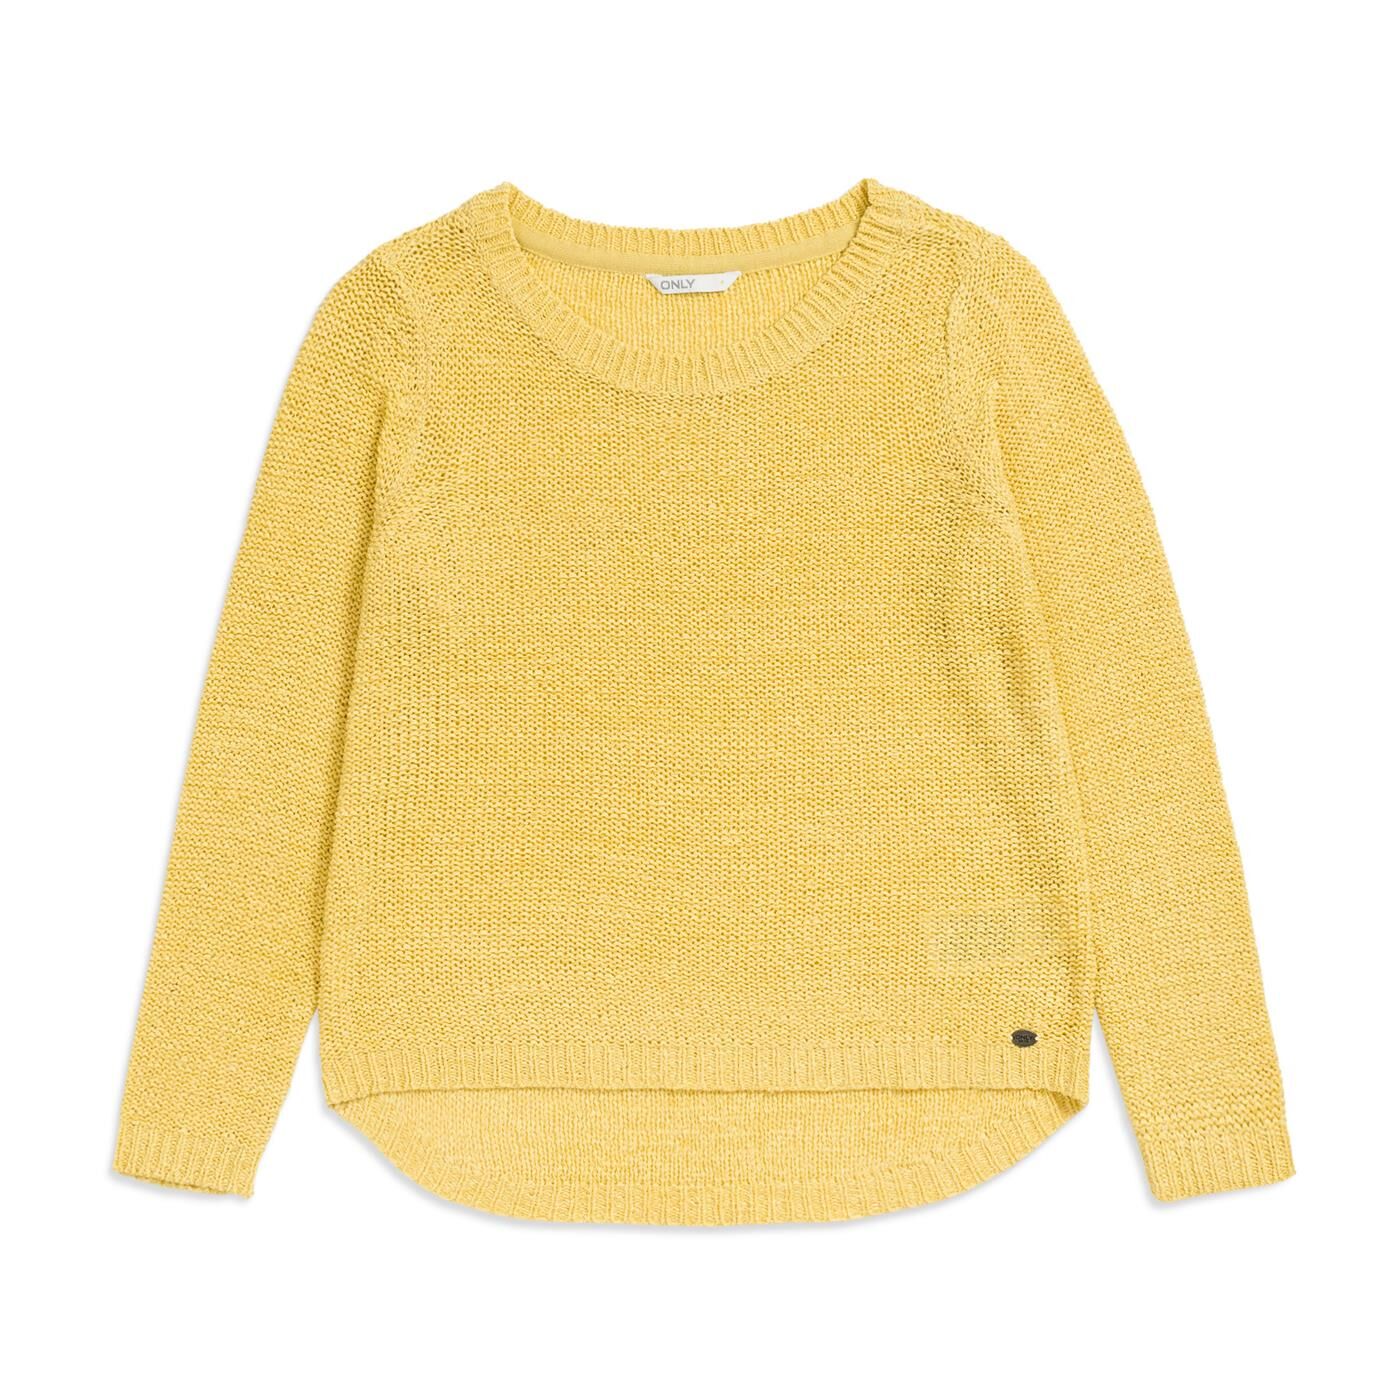 Only Geena Xo L/s Pullover Knit